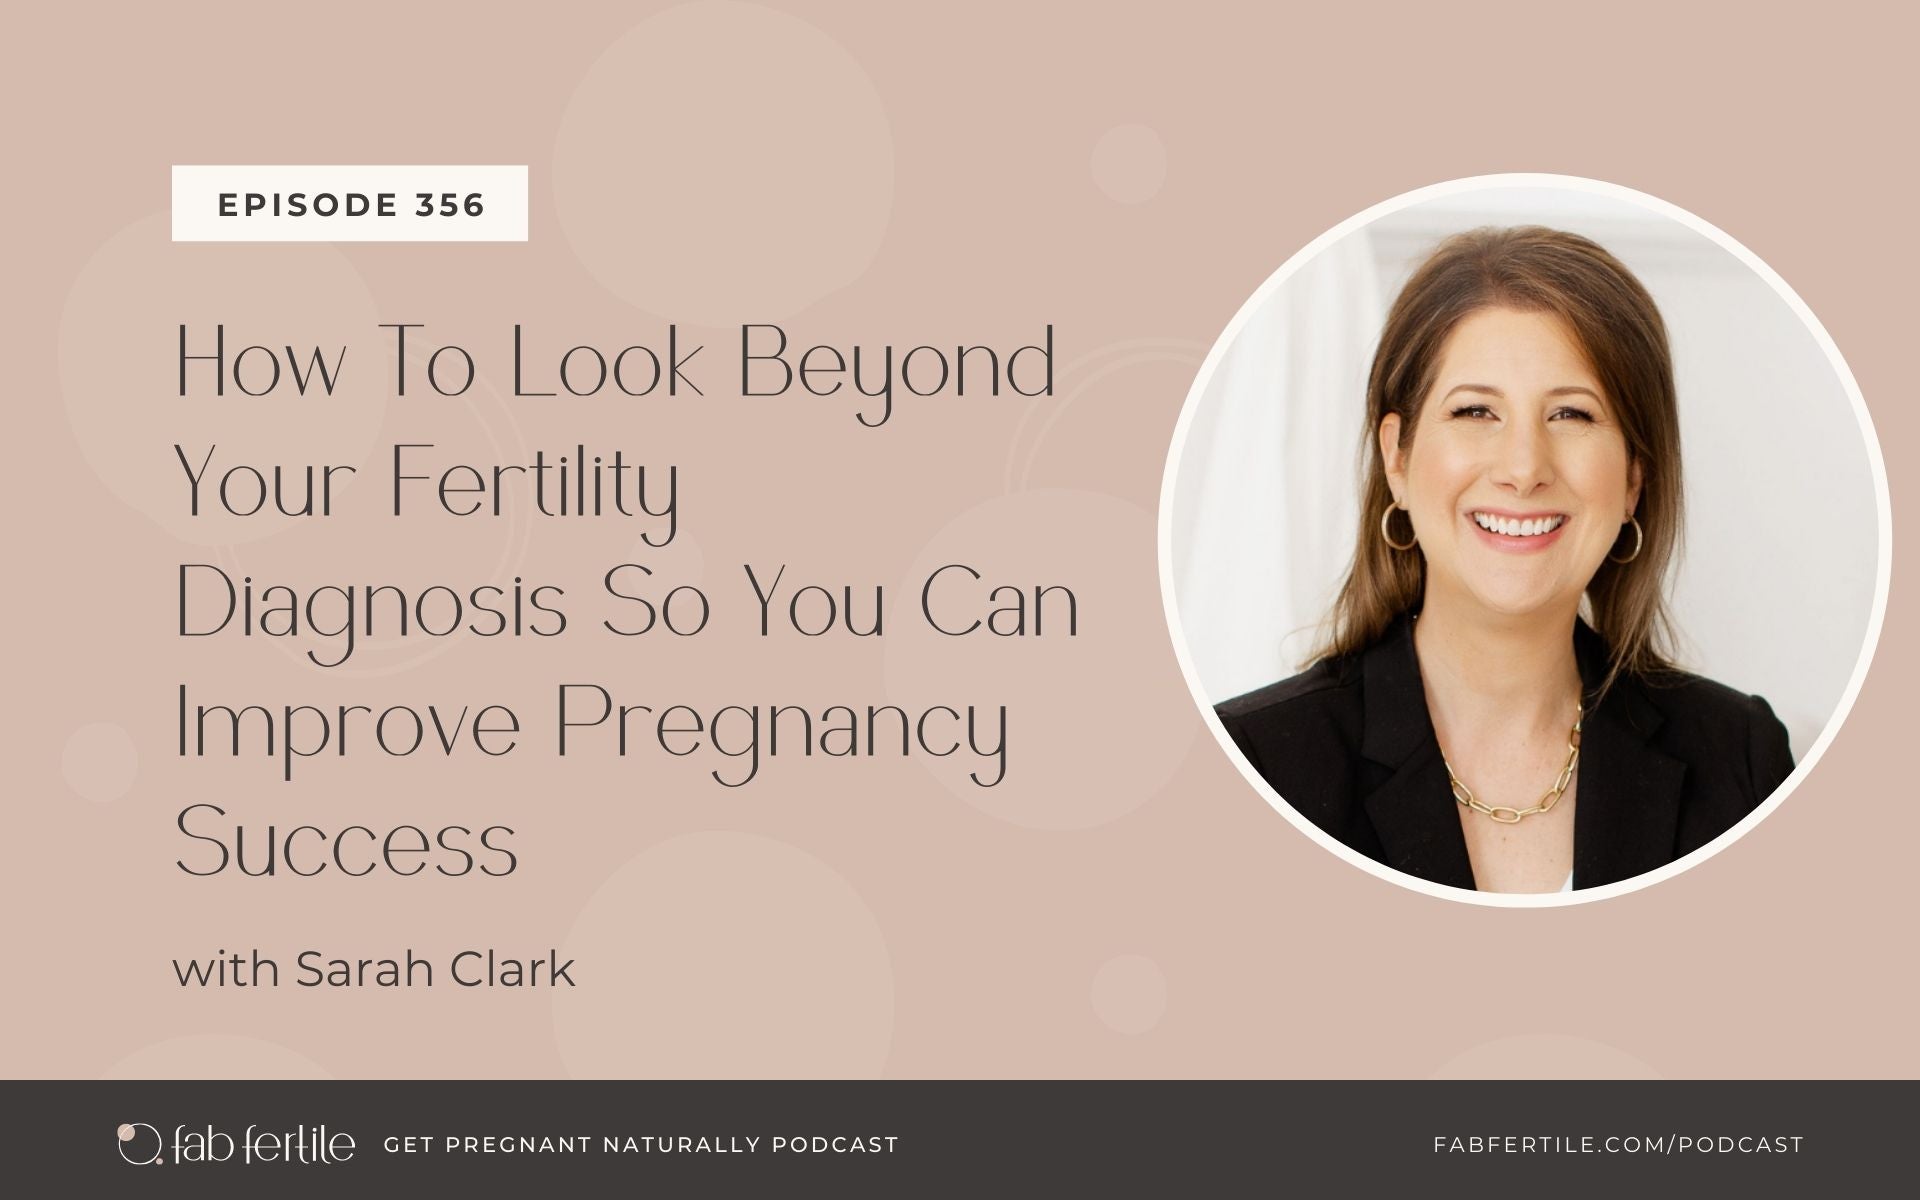 How To Look Beyond Your Fertility Diagnosis So You Can Improve Pregnancy Success